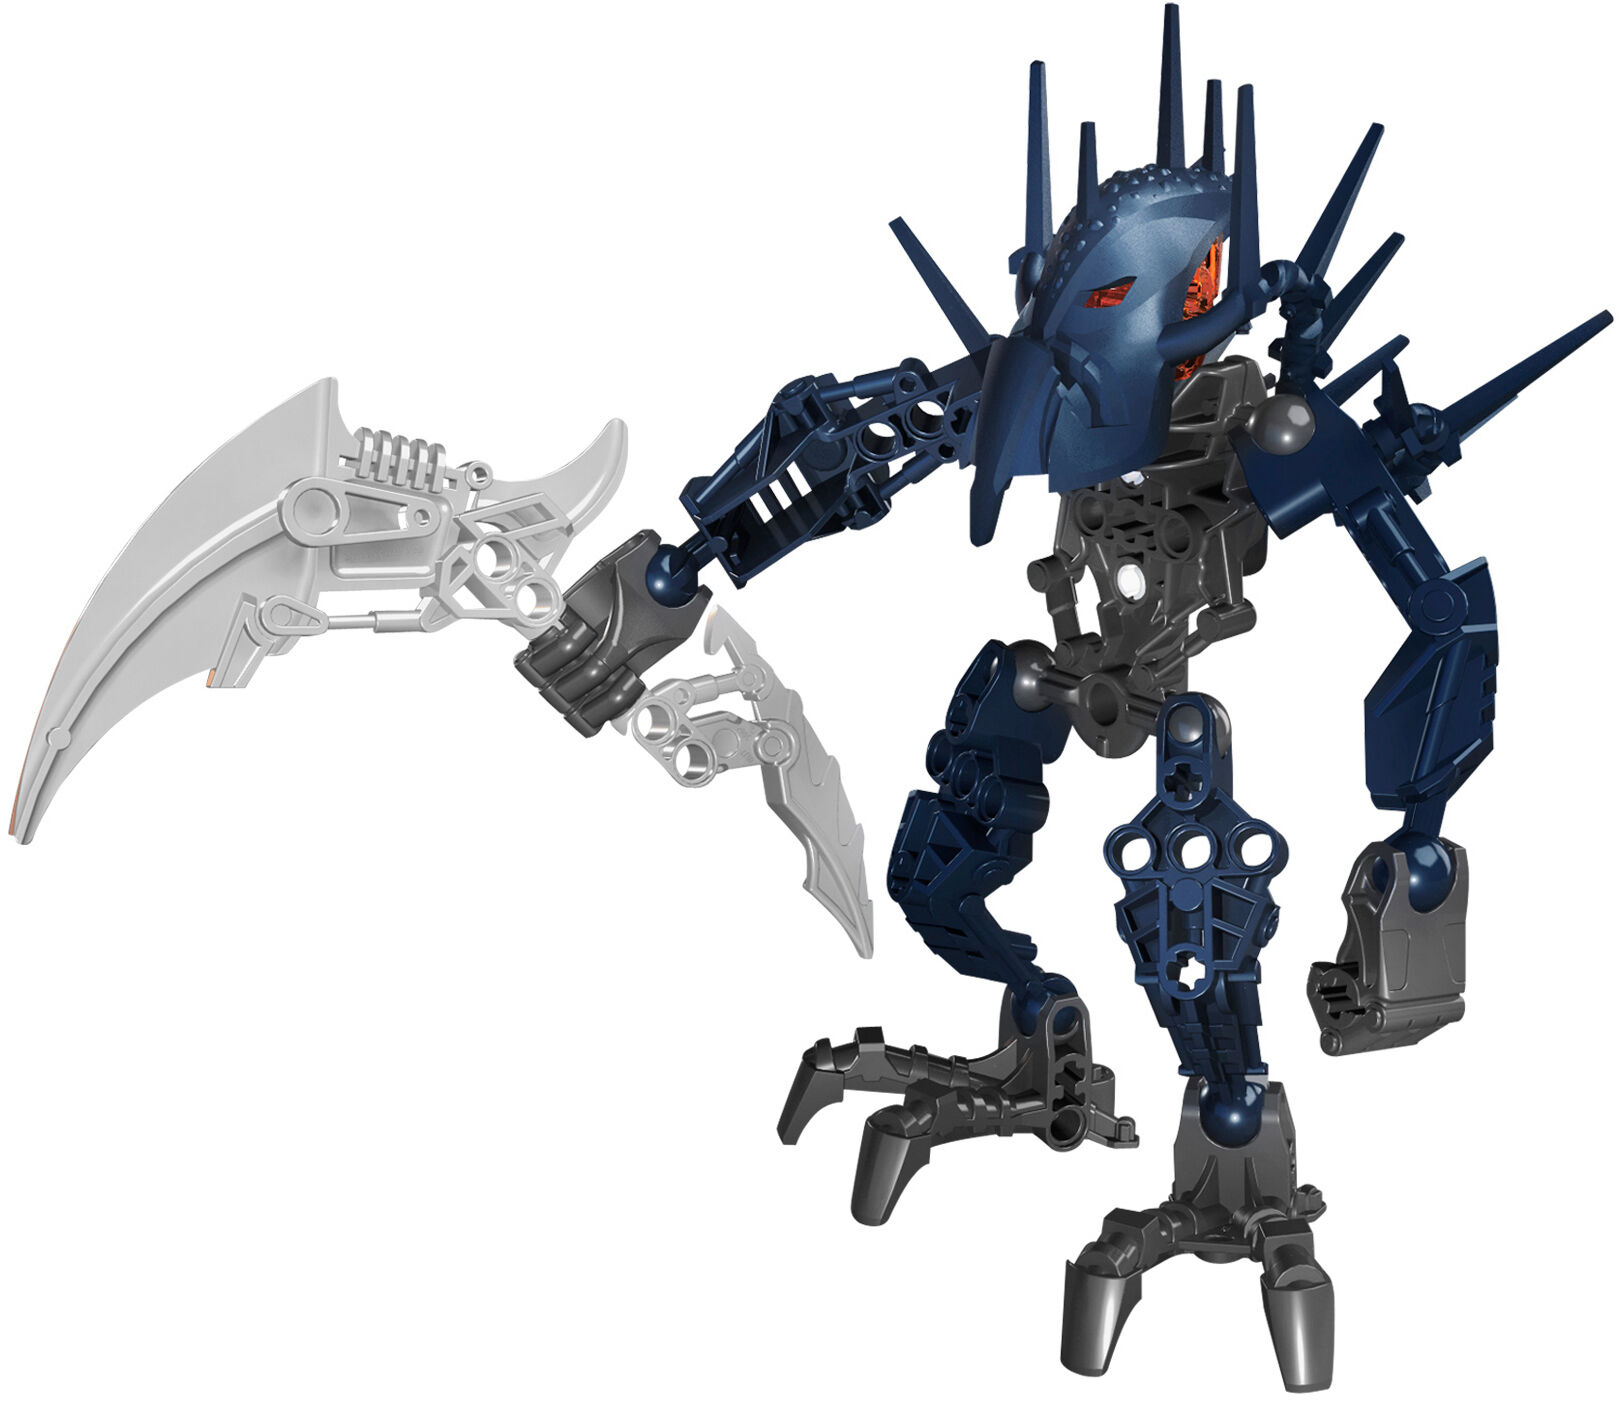 LEGO® Bionicle 2010 Stars Review 